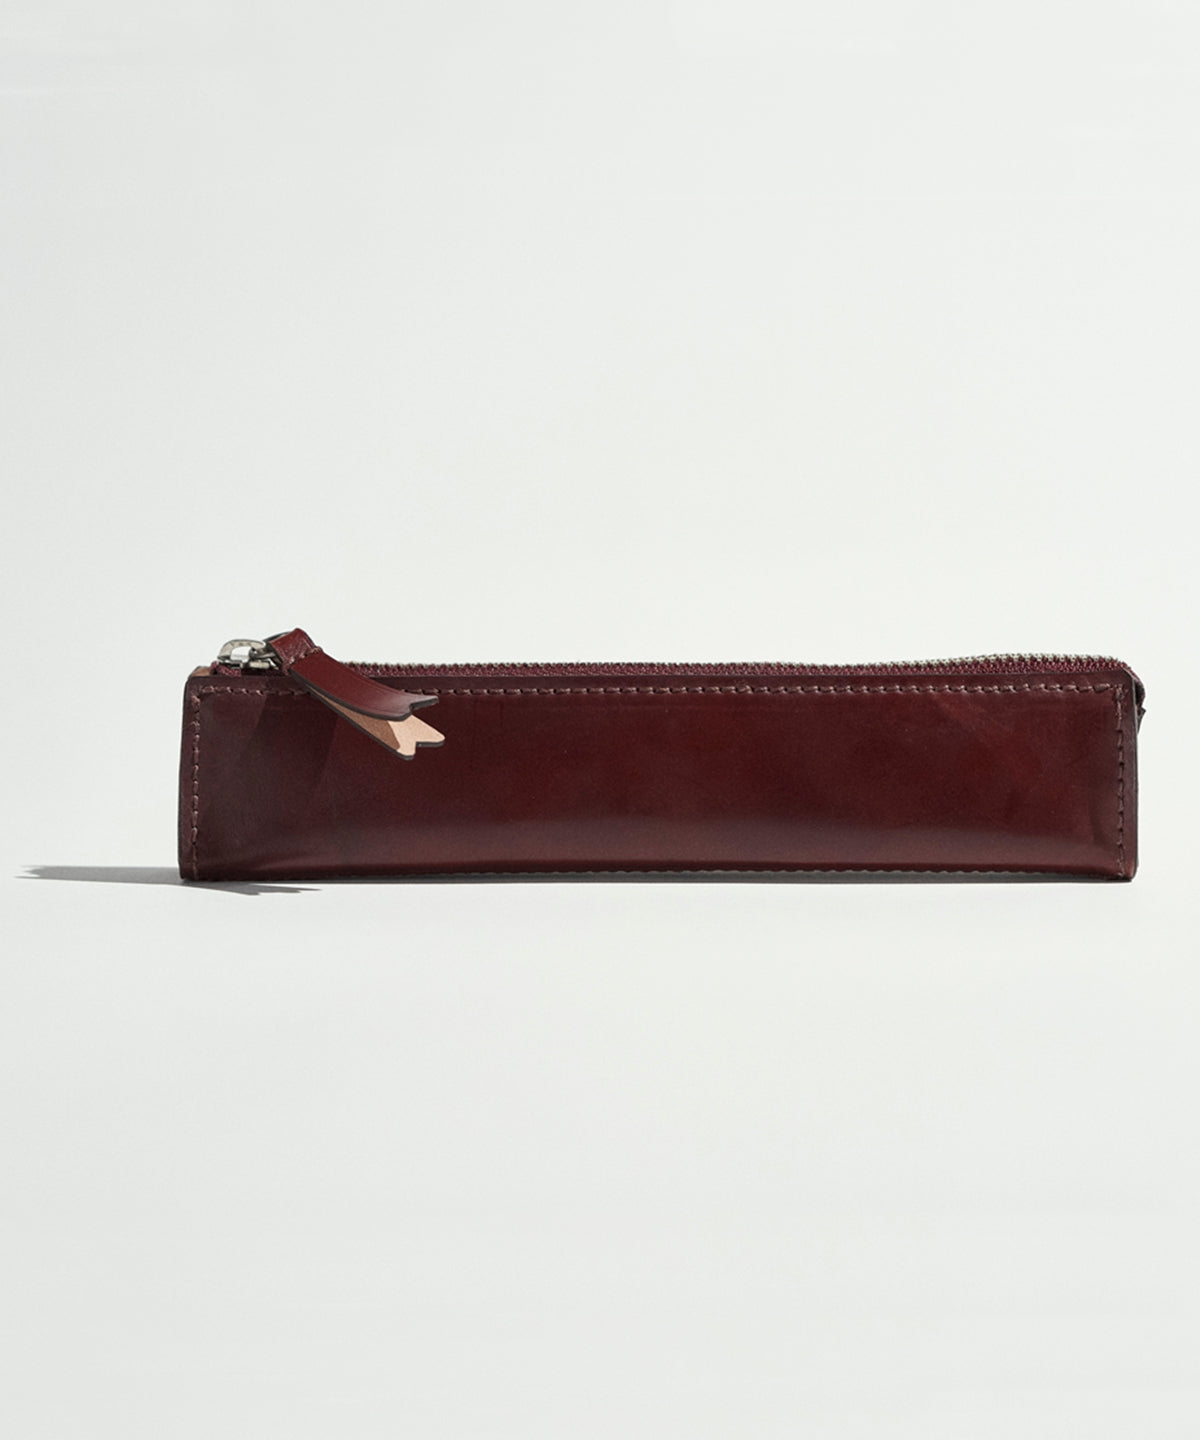 ANATOMICA CORDOVAN PENCASE With a Pen by ZOOM